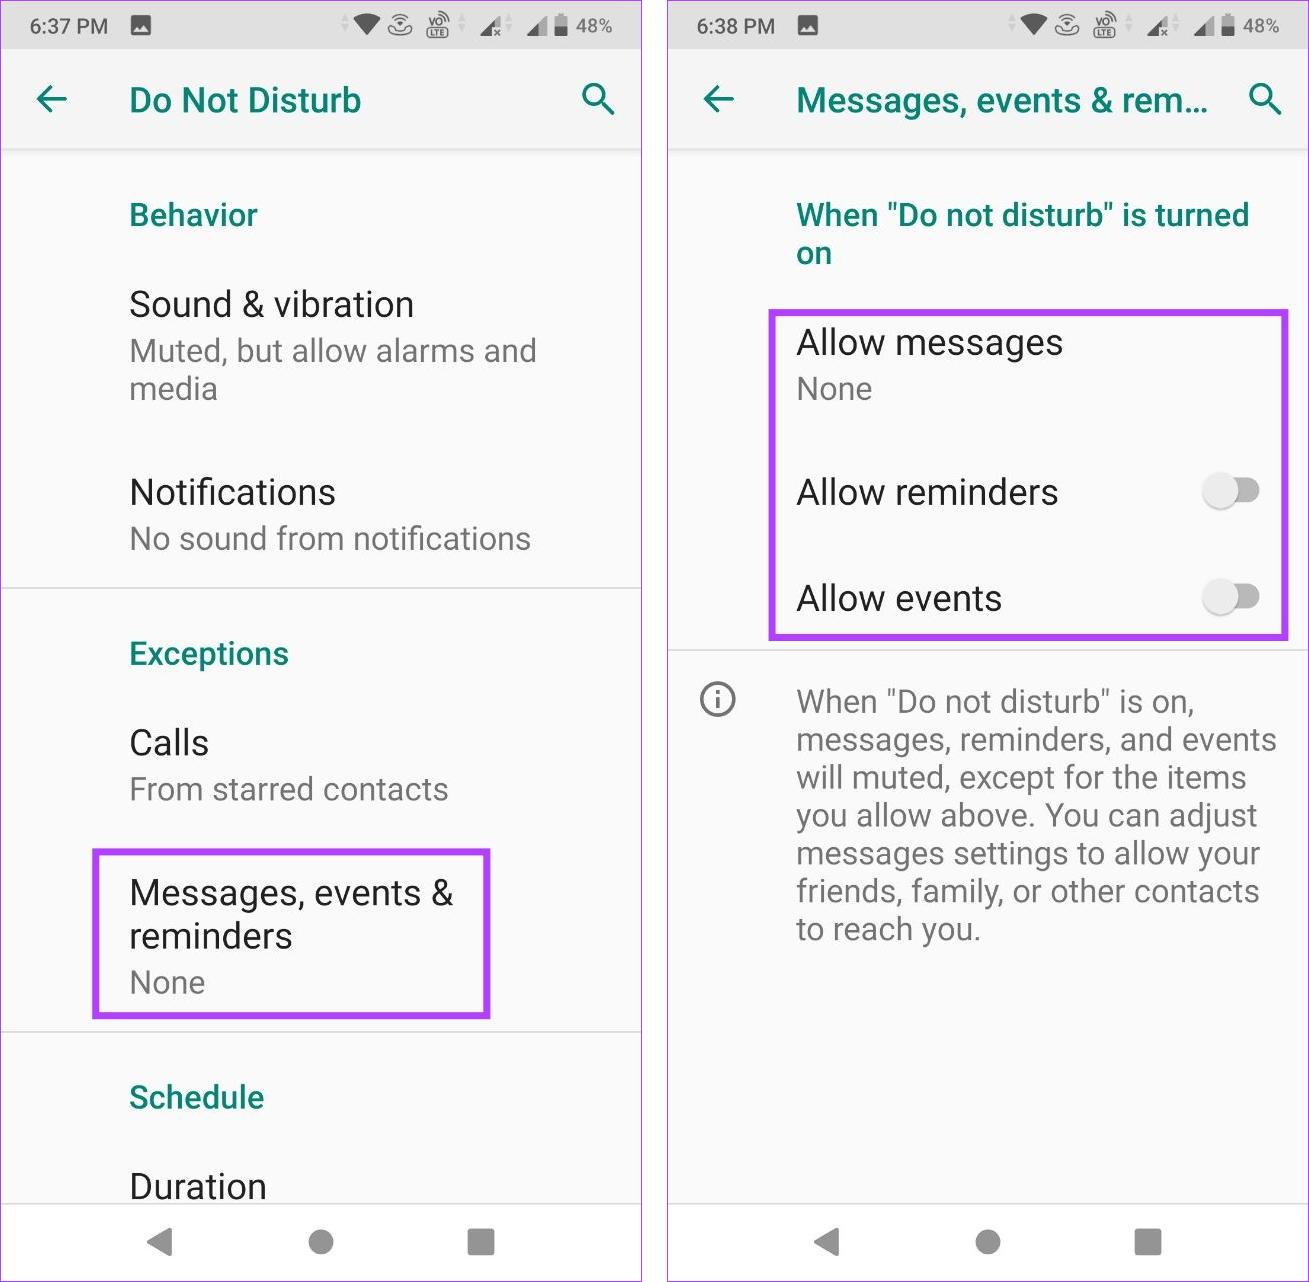 Add DND exception for Messages and reminders